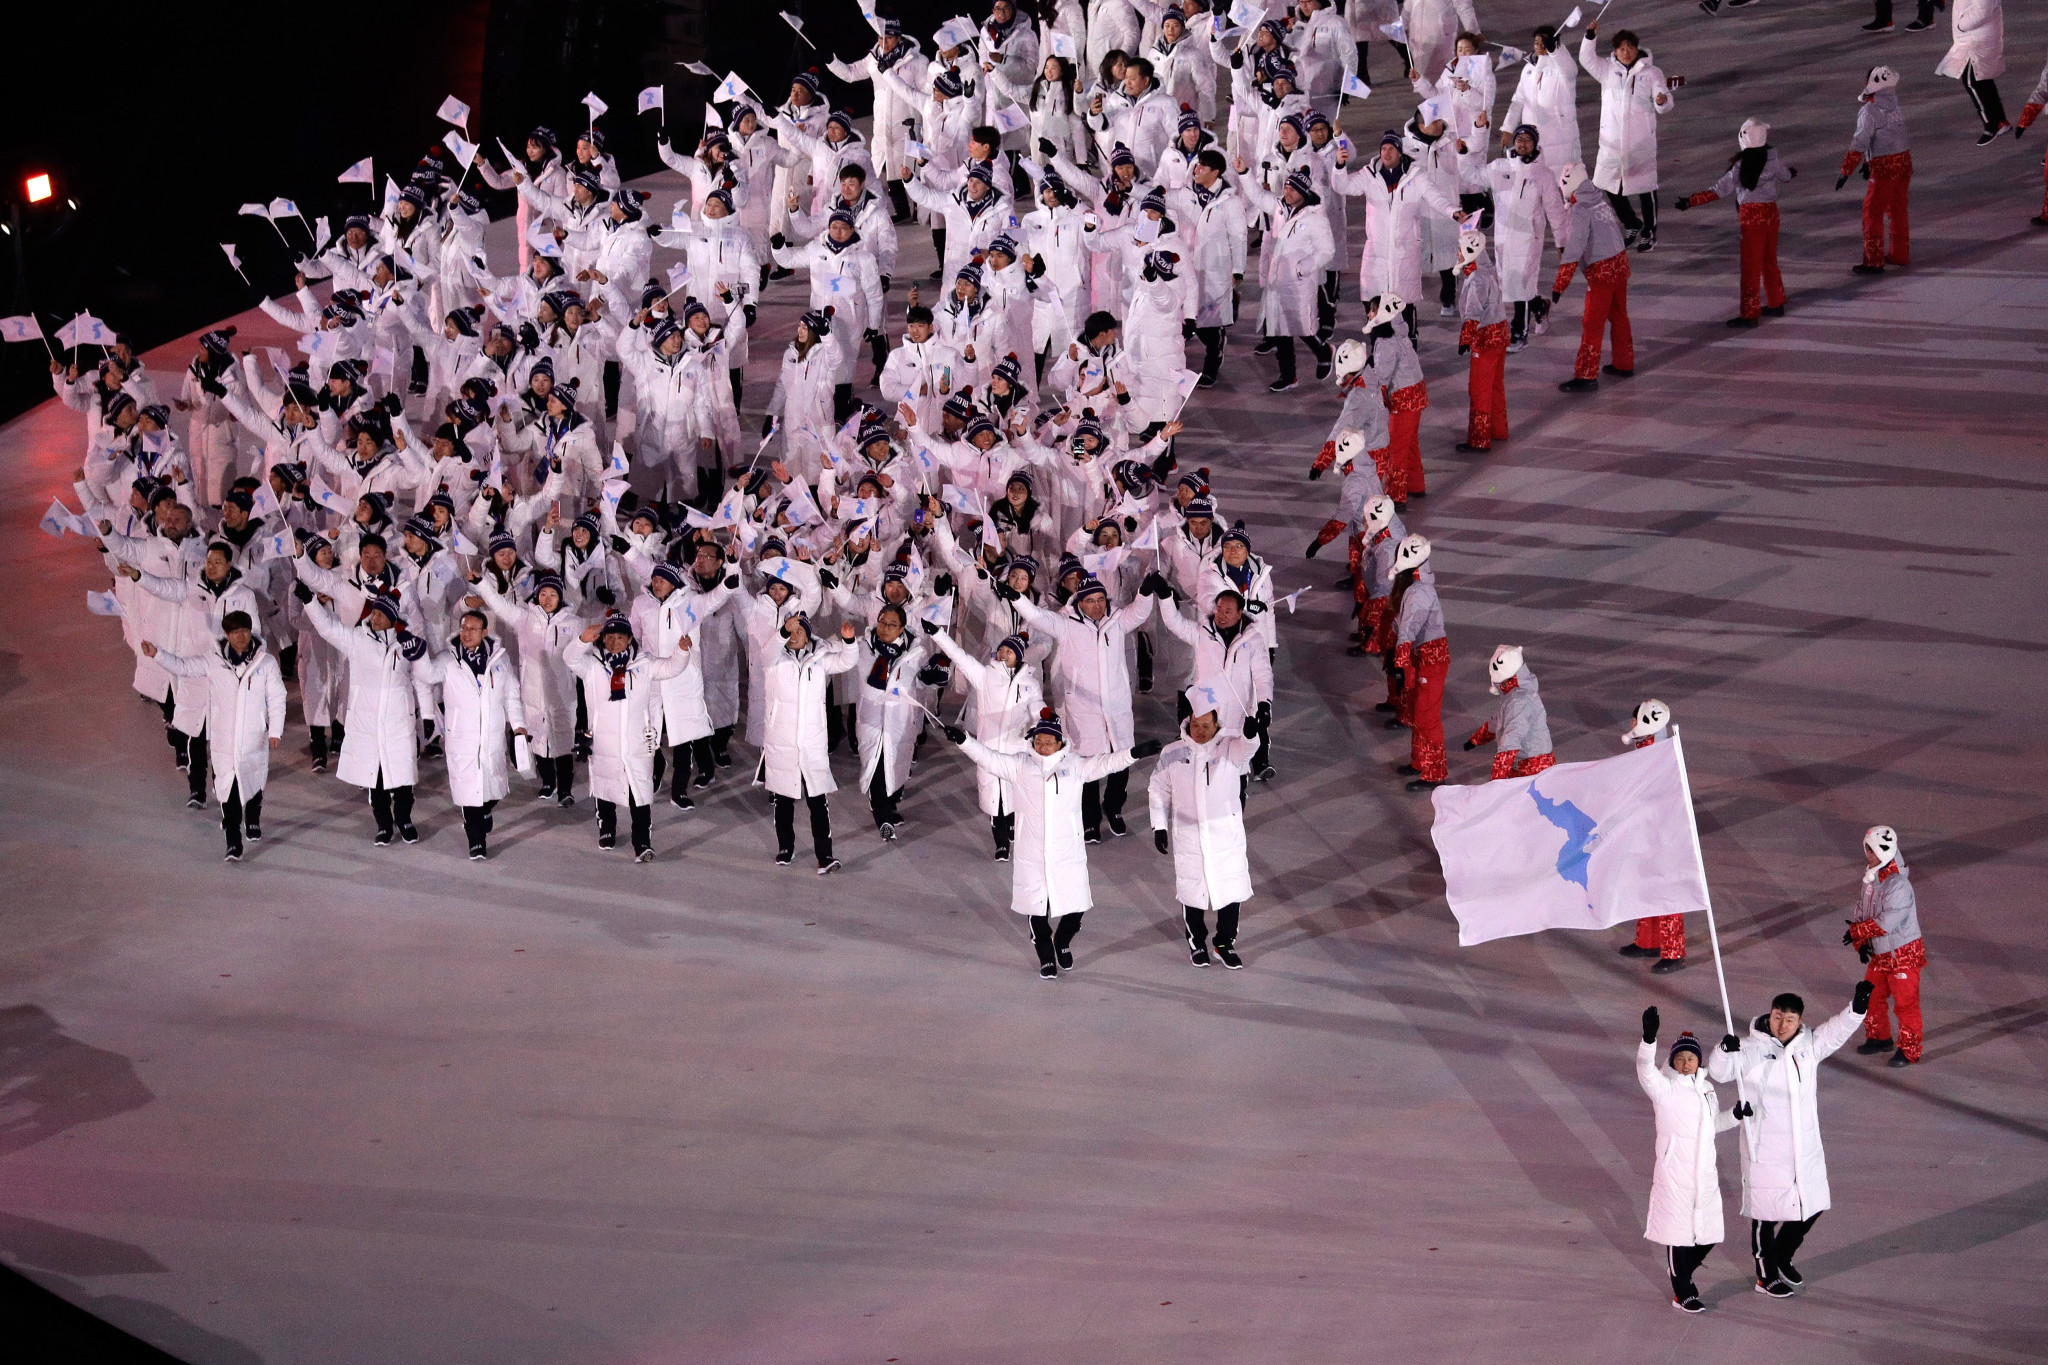 The North Korean and South Korean Olympic teams entered the Pyeongchang 2018 Opening Ceremony under a Korean Unification Flag, but the North Korean NOC was this month suspended by the IOC after failing to send athletes to Tokyo 2020 ©Getty Images